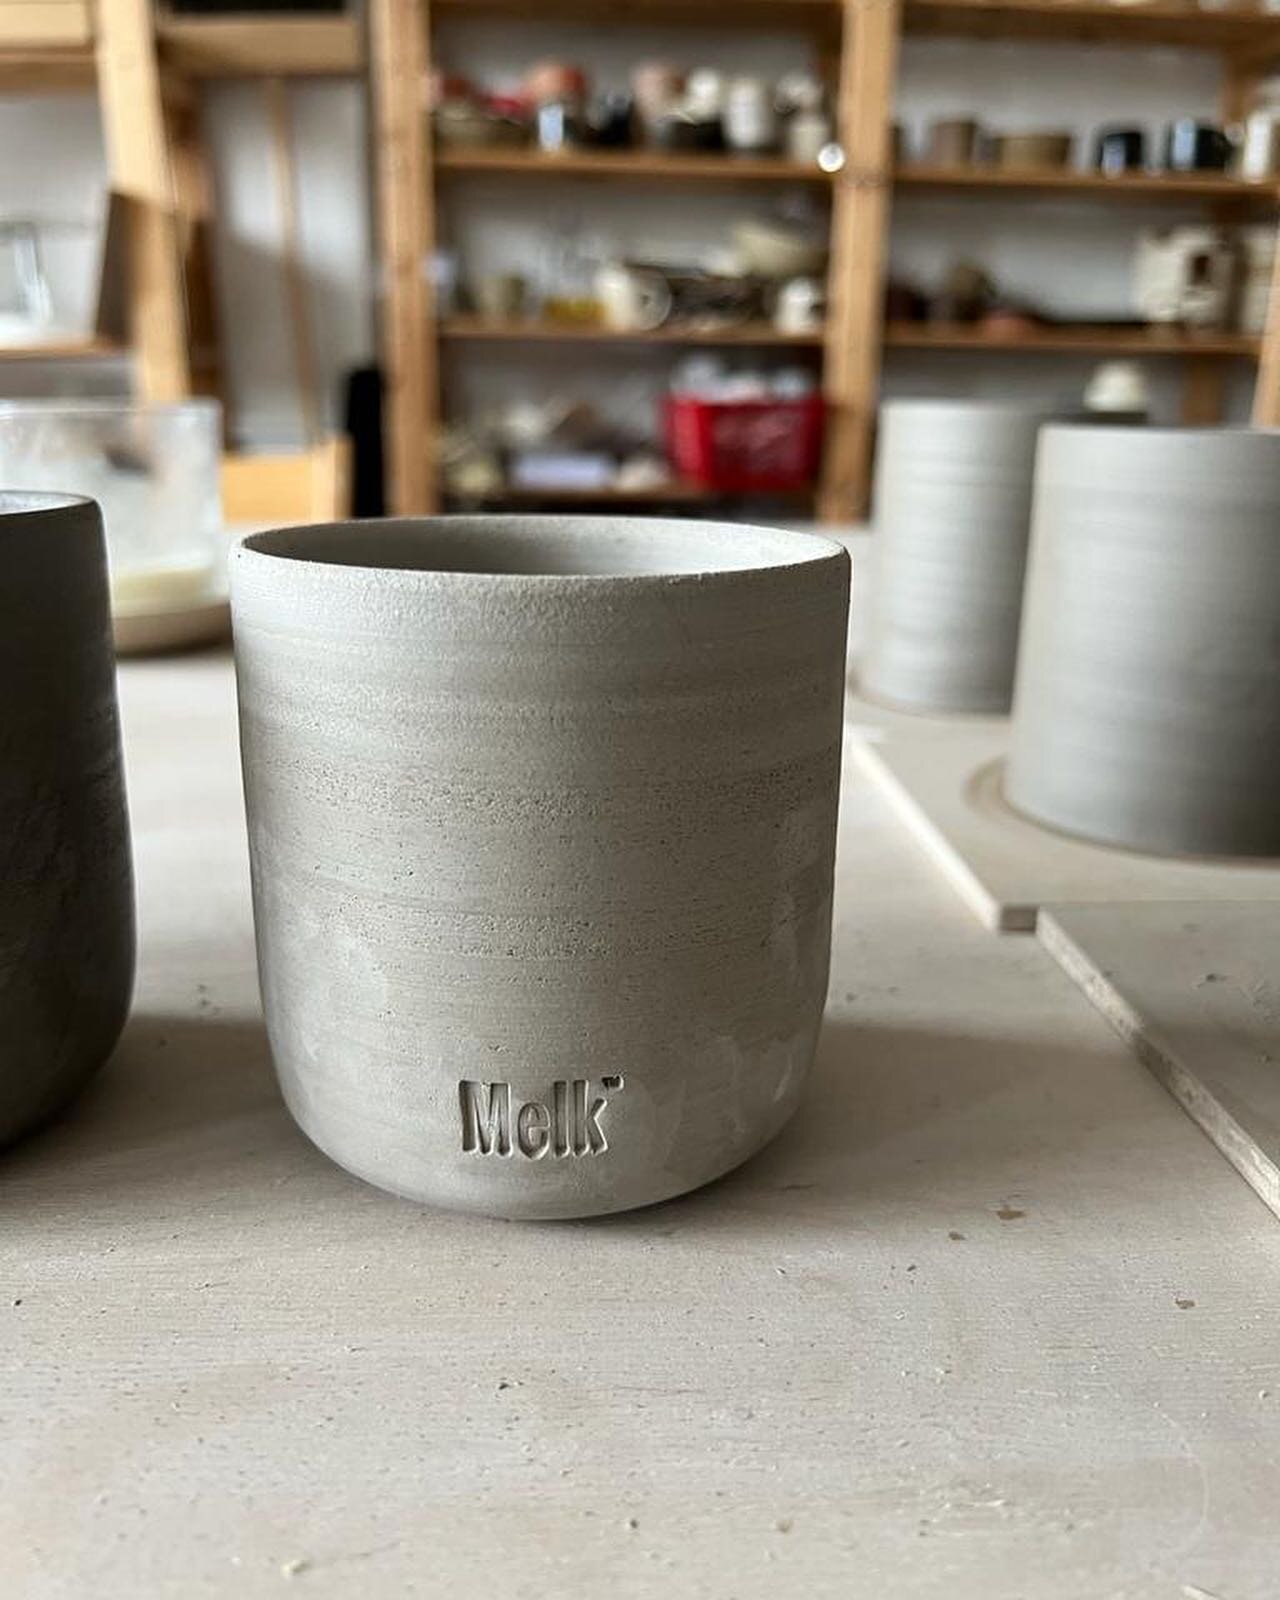 We spent some time with @by.noo.ceramics deciding on exactly what kind of feel and experience we want to leave our customers with. The textured ceramic cups felt just right! Hand crafted and stamped just for us! 

Can&rsquo;t wait to serve the first 